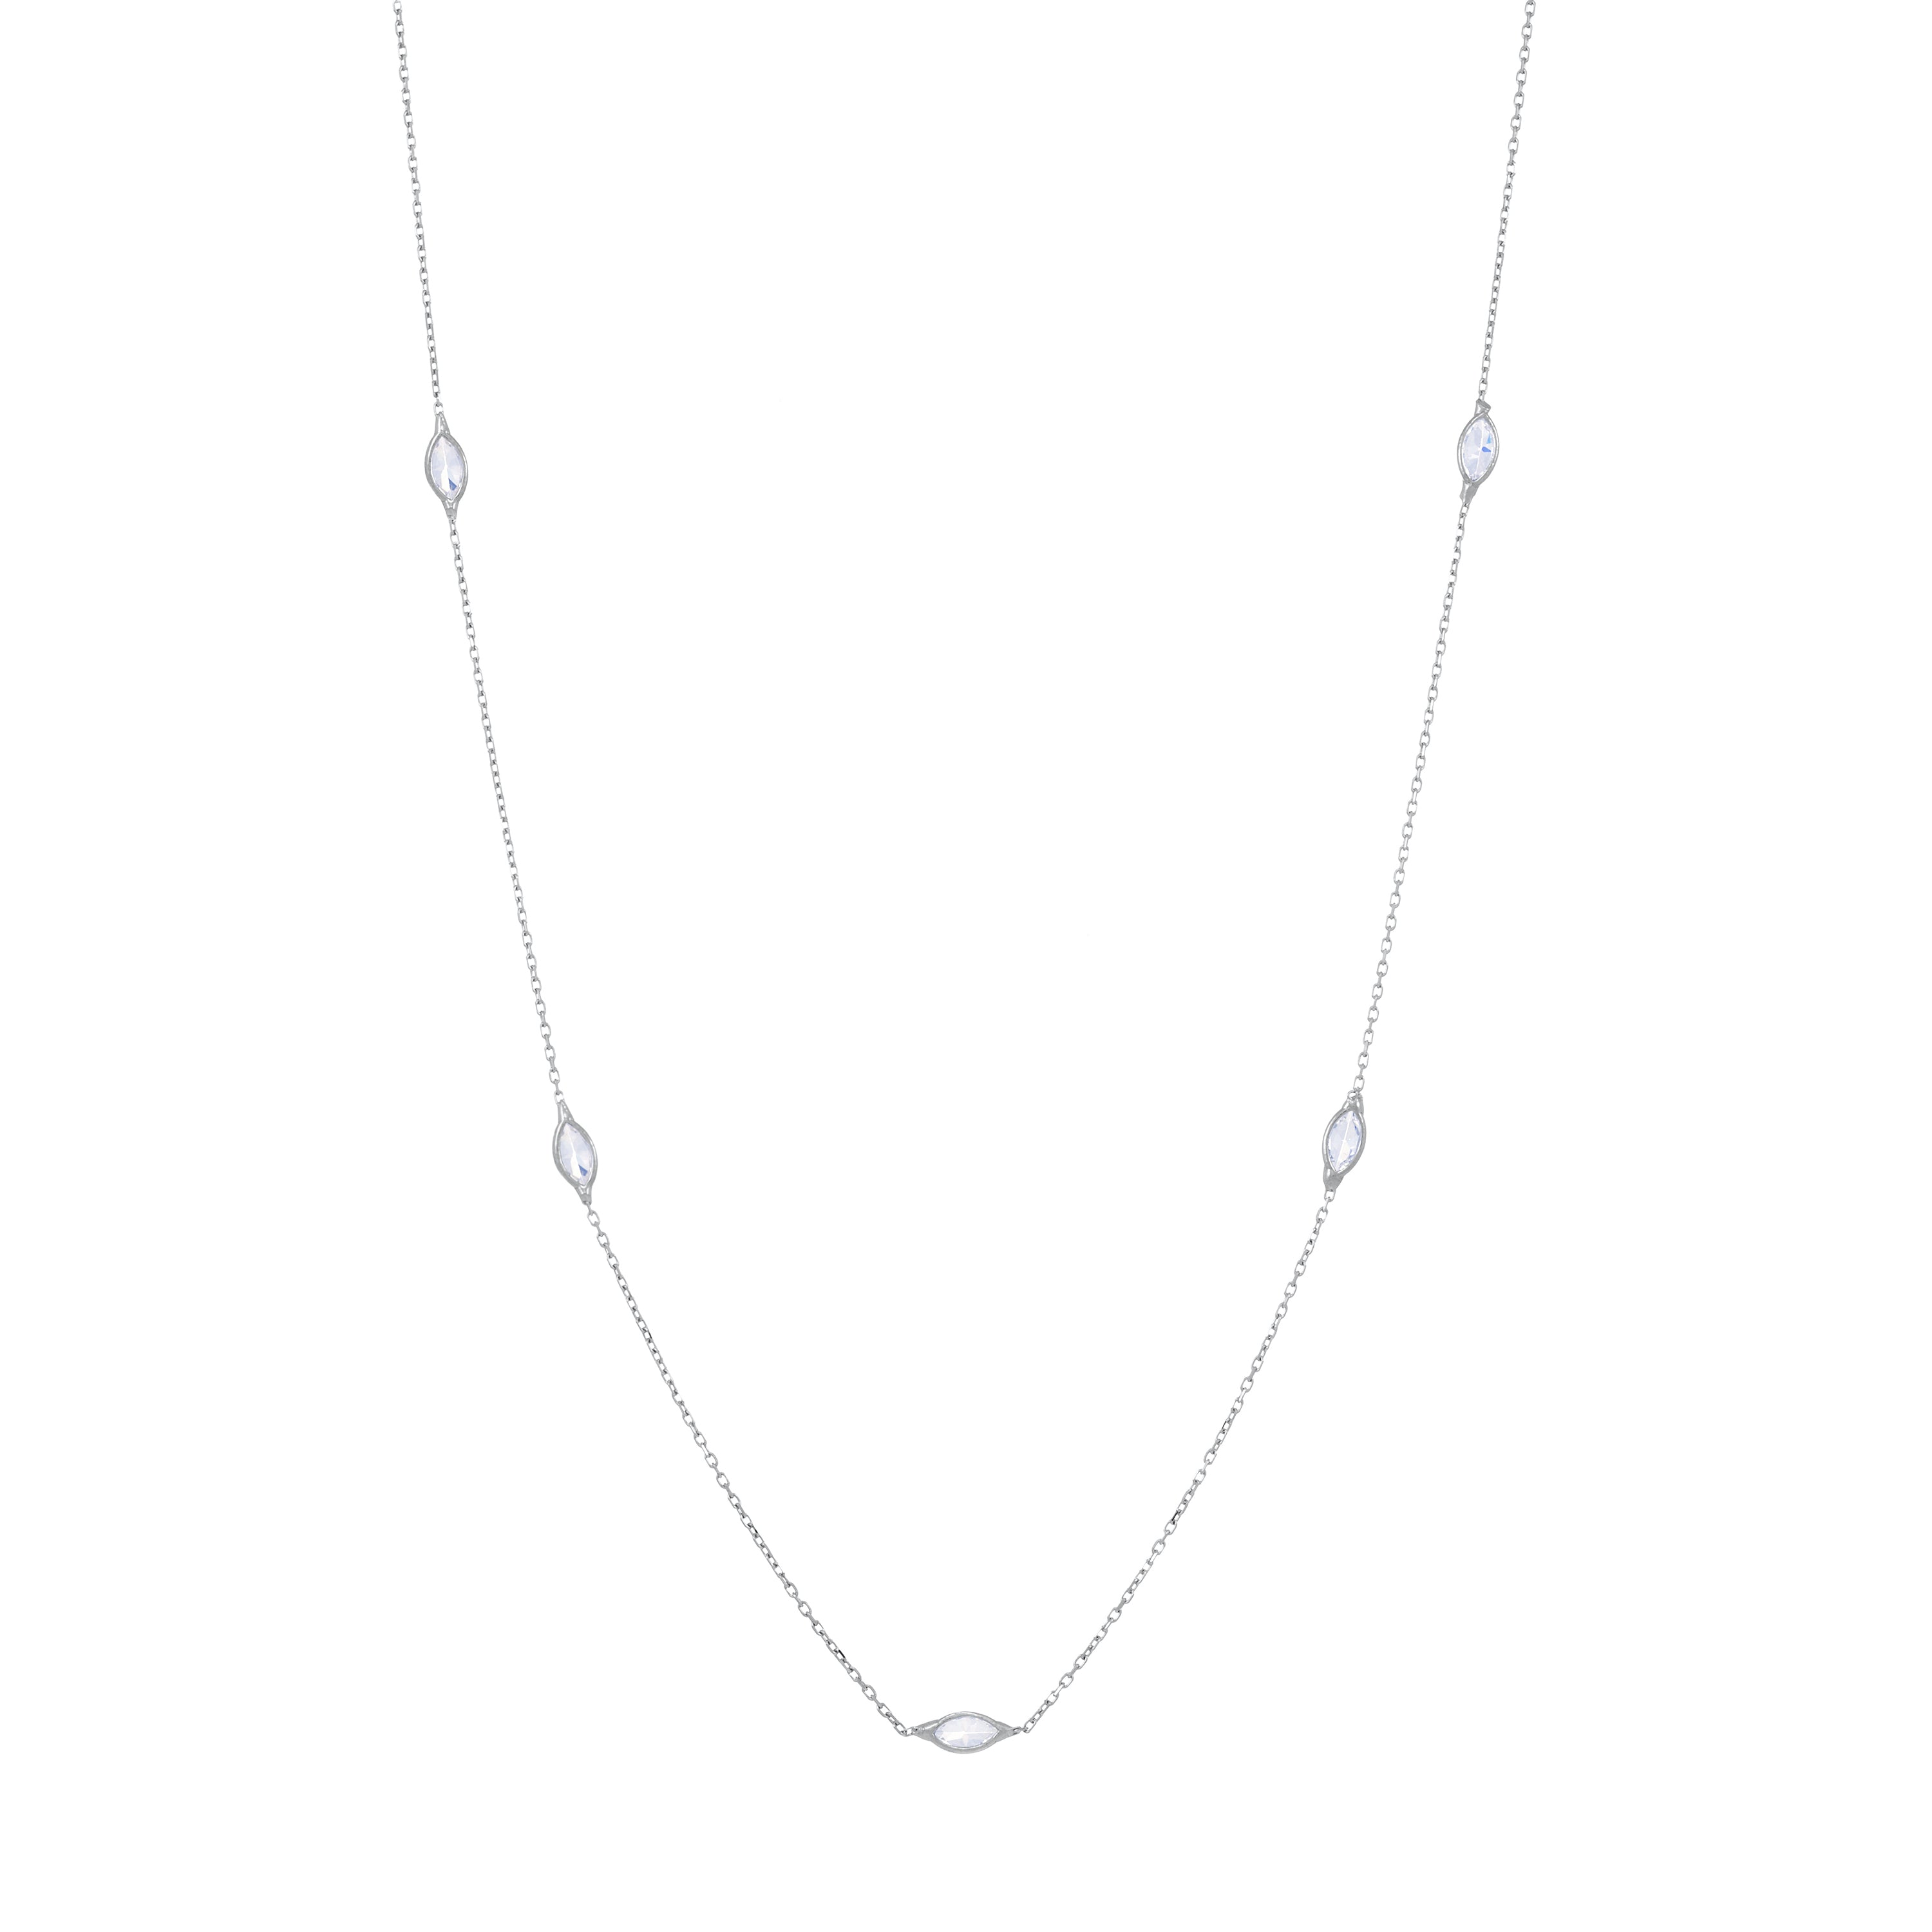 Marquise Bezel Long Chain Necklace